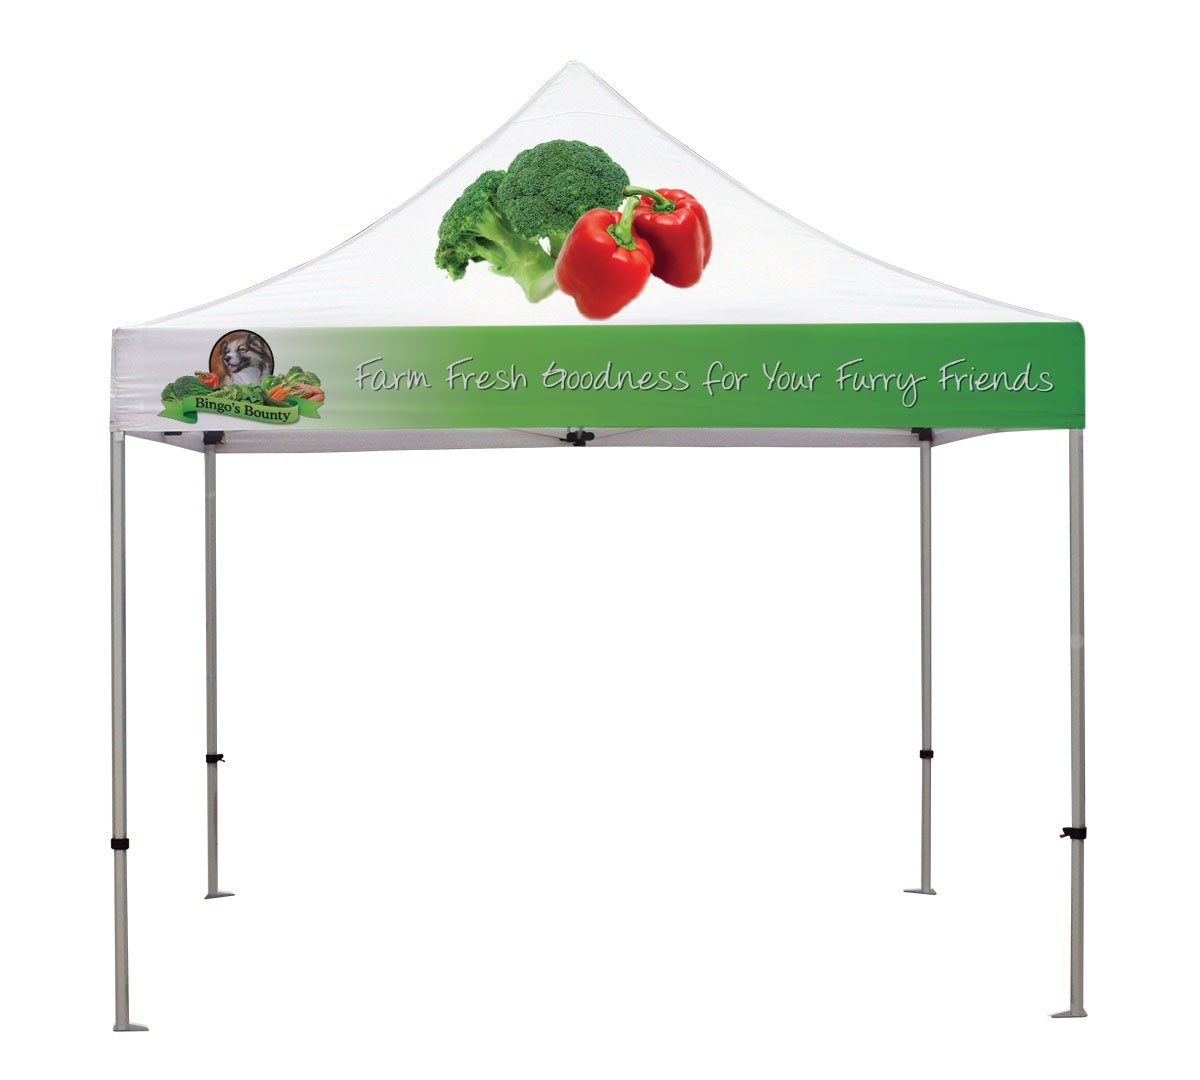 Canopy Tent Kit with custom printed top